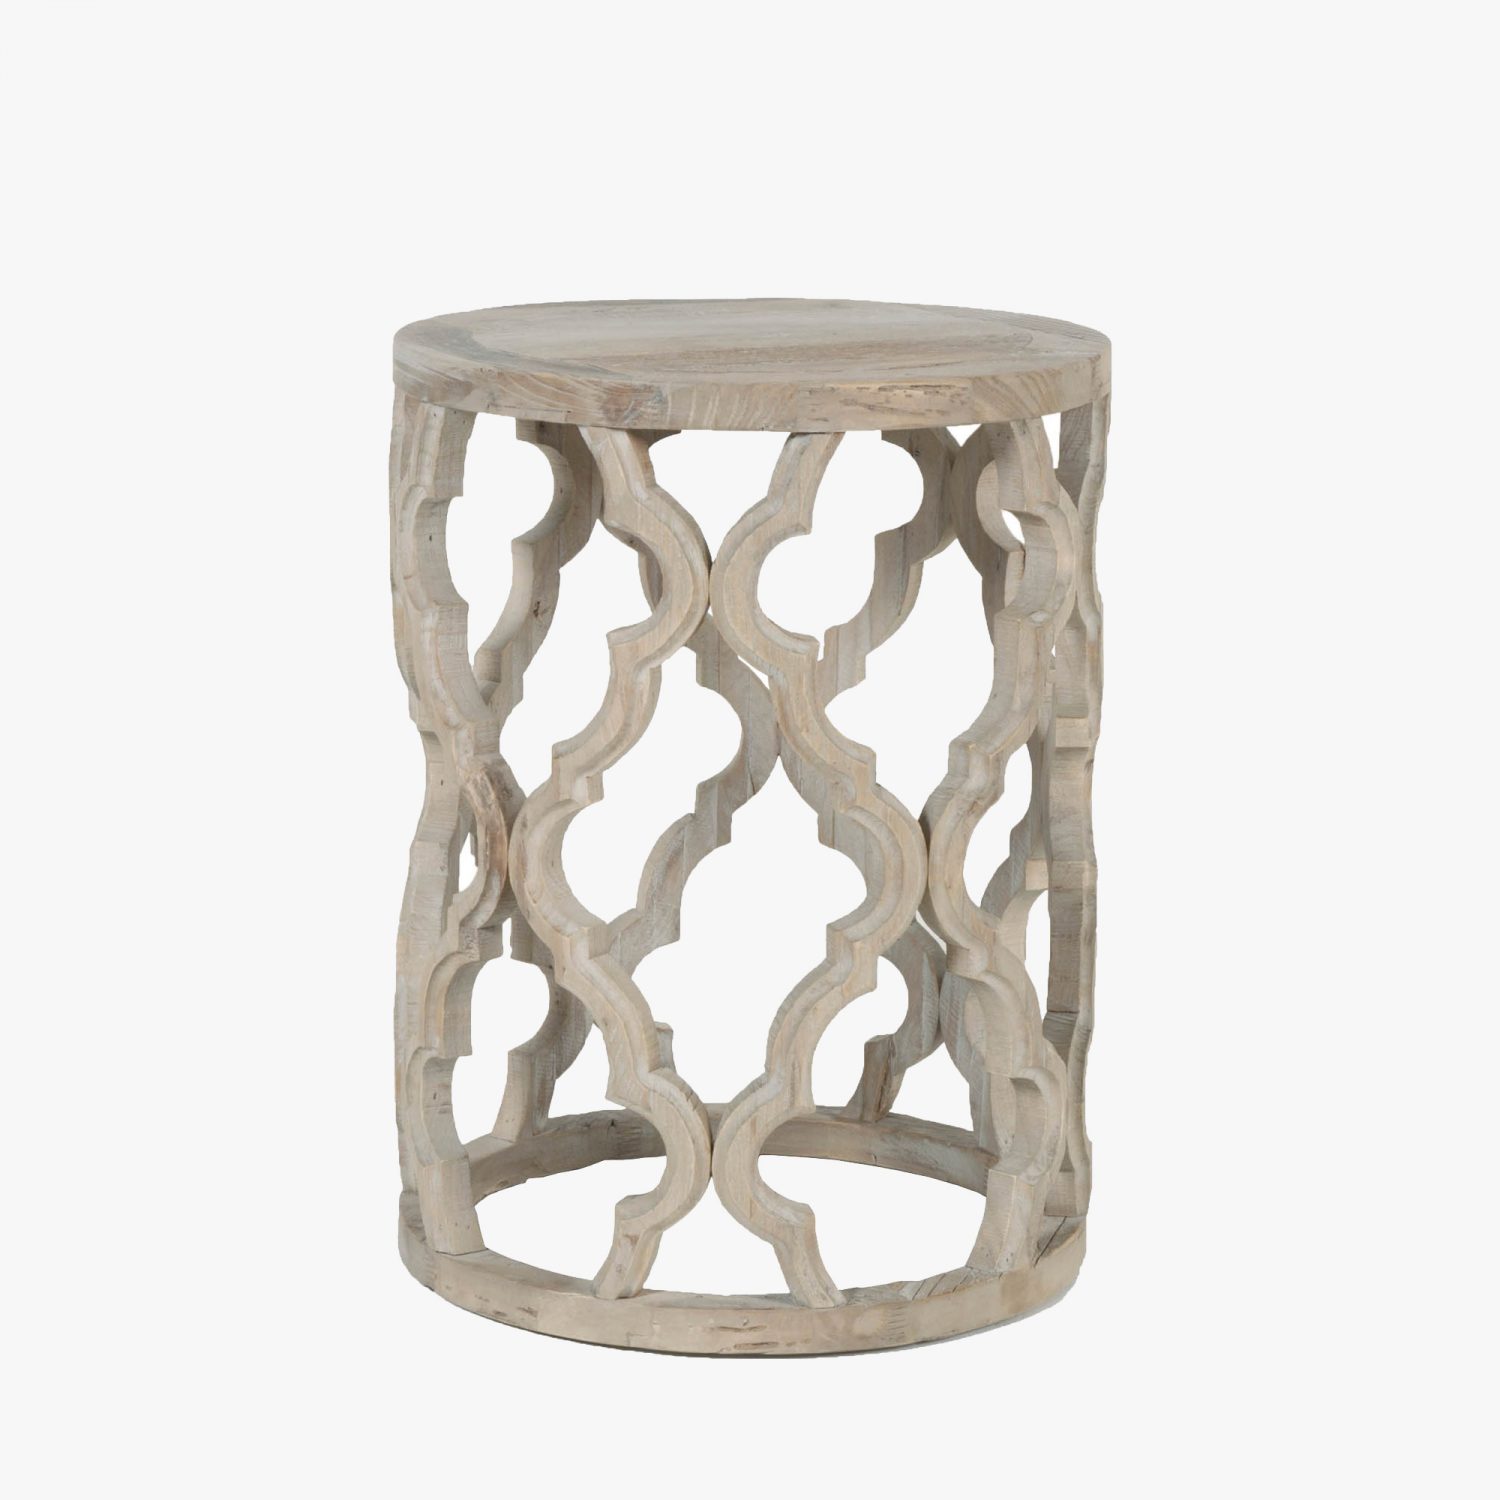 carved quatrefoil side table accent tables dear keaton woven metal colorful ashley furniture coffee and end modern sofa three target white chairs bunnings outdoor cover kitchen